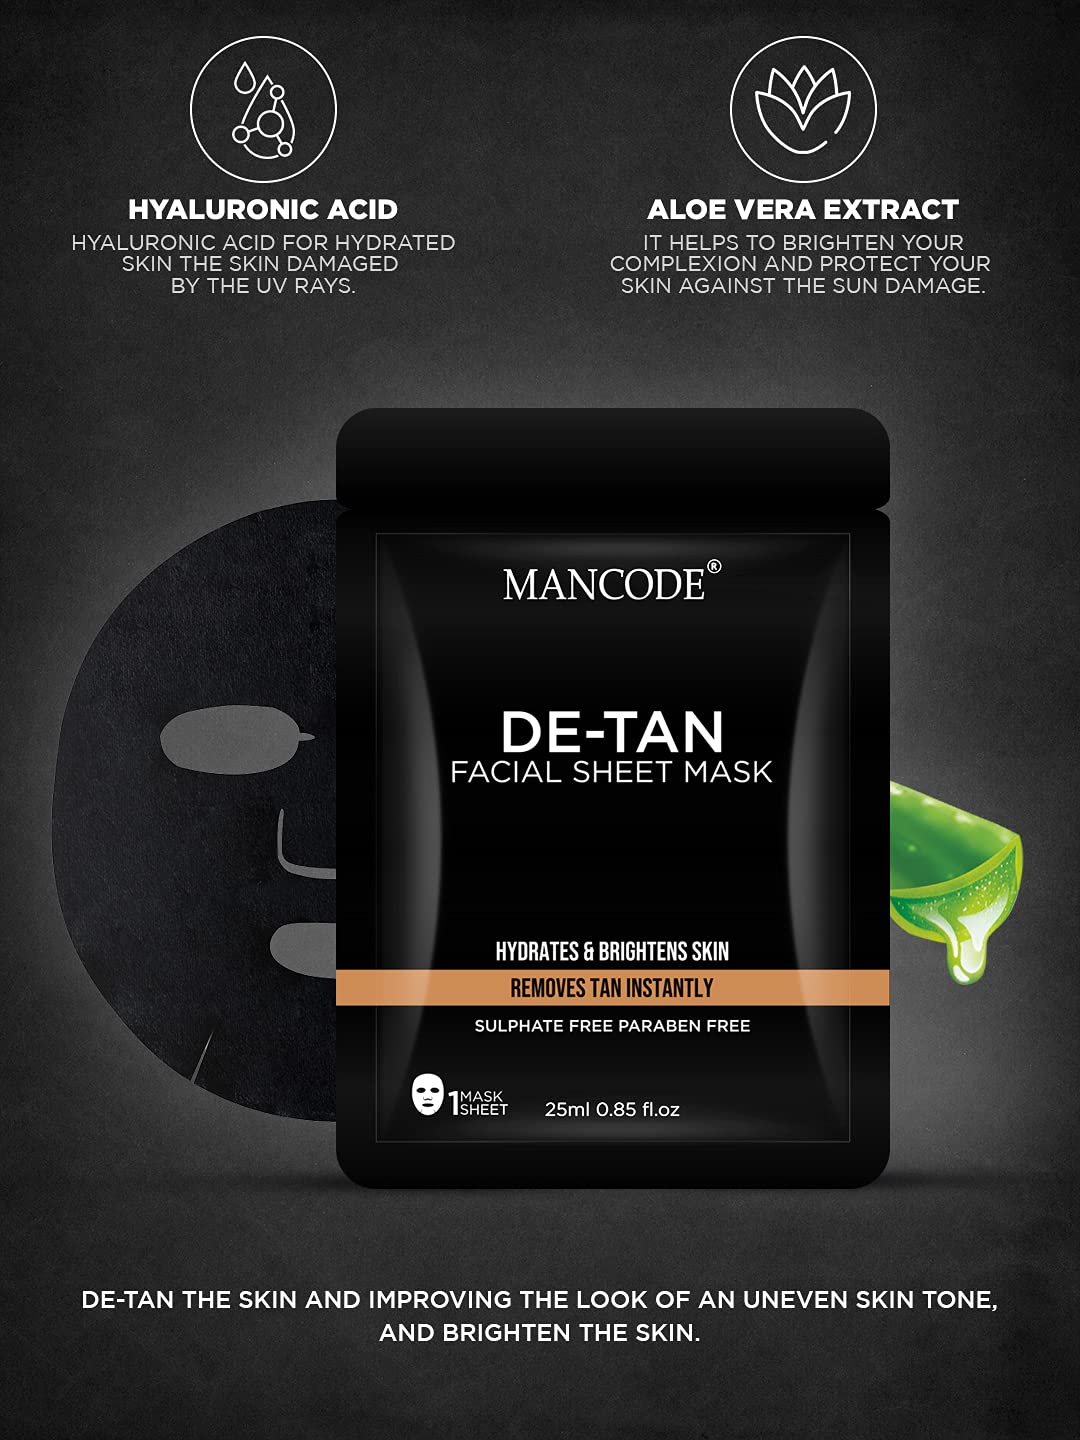 Mancode De-Tan Facial Sheet Mask Removes Tan Instantly | Fight Pimple | Purifying and Brightening | Hydrating & Detoxifying | 1 Mask Sheet